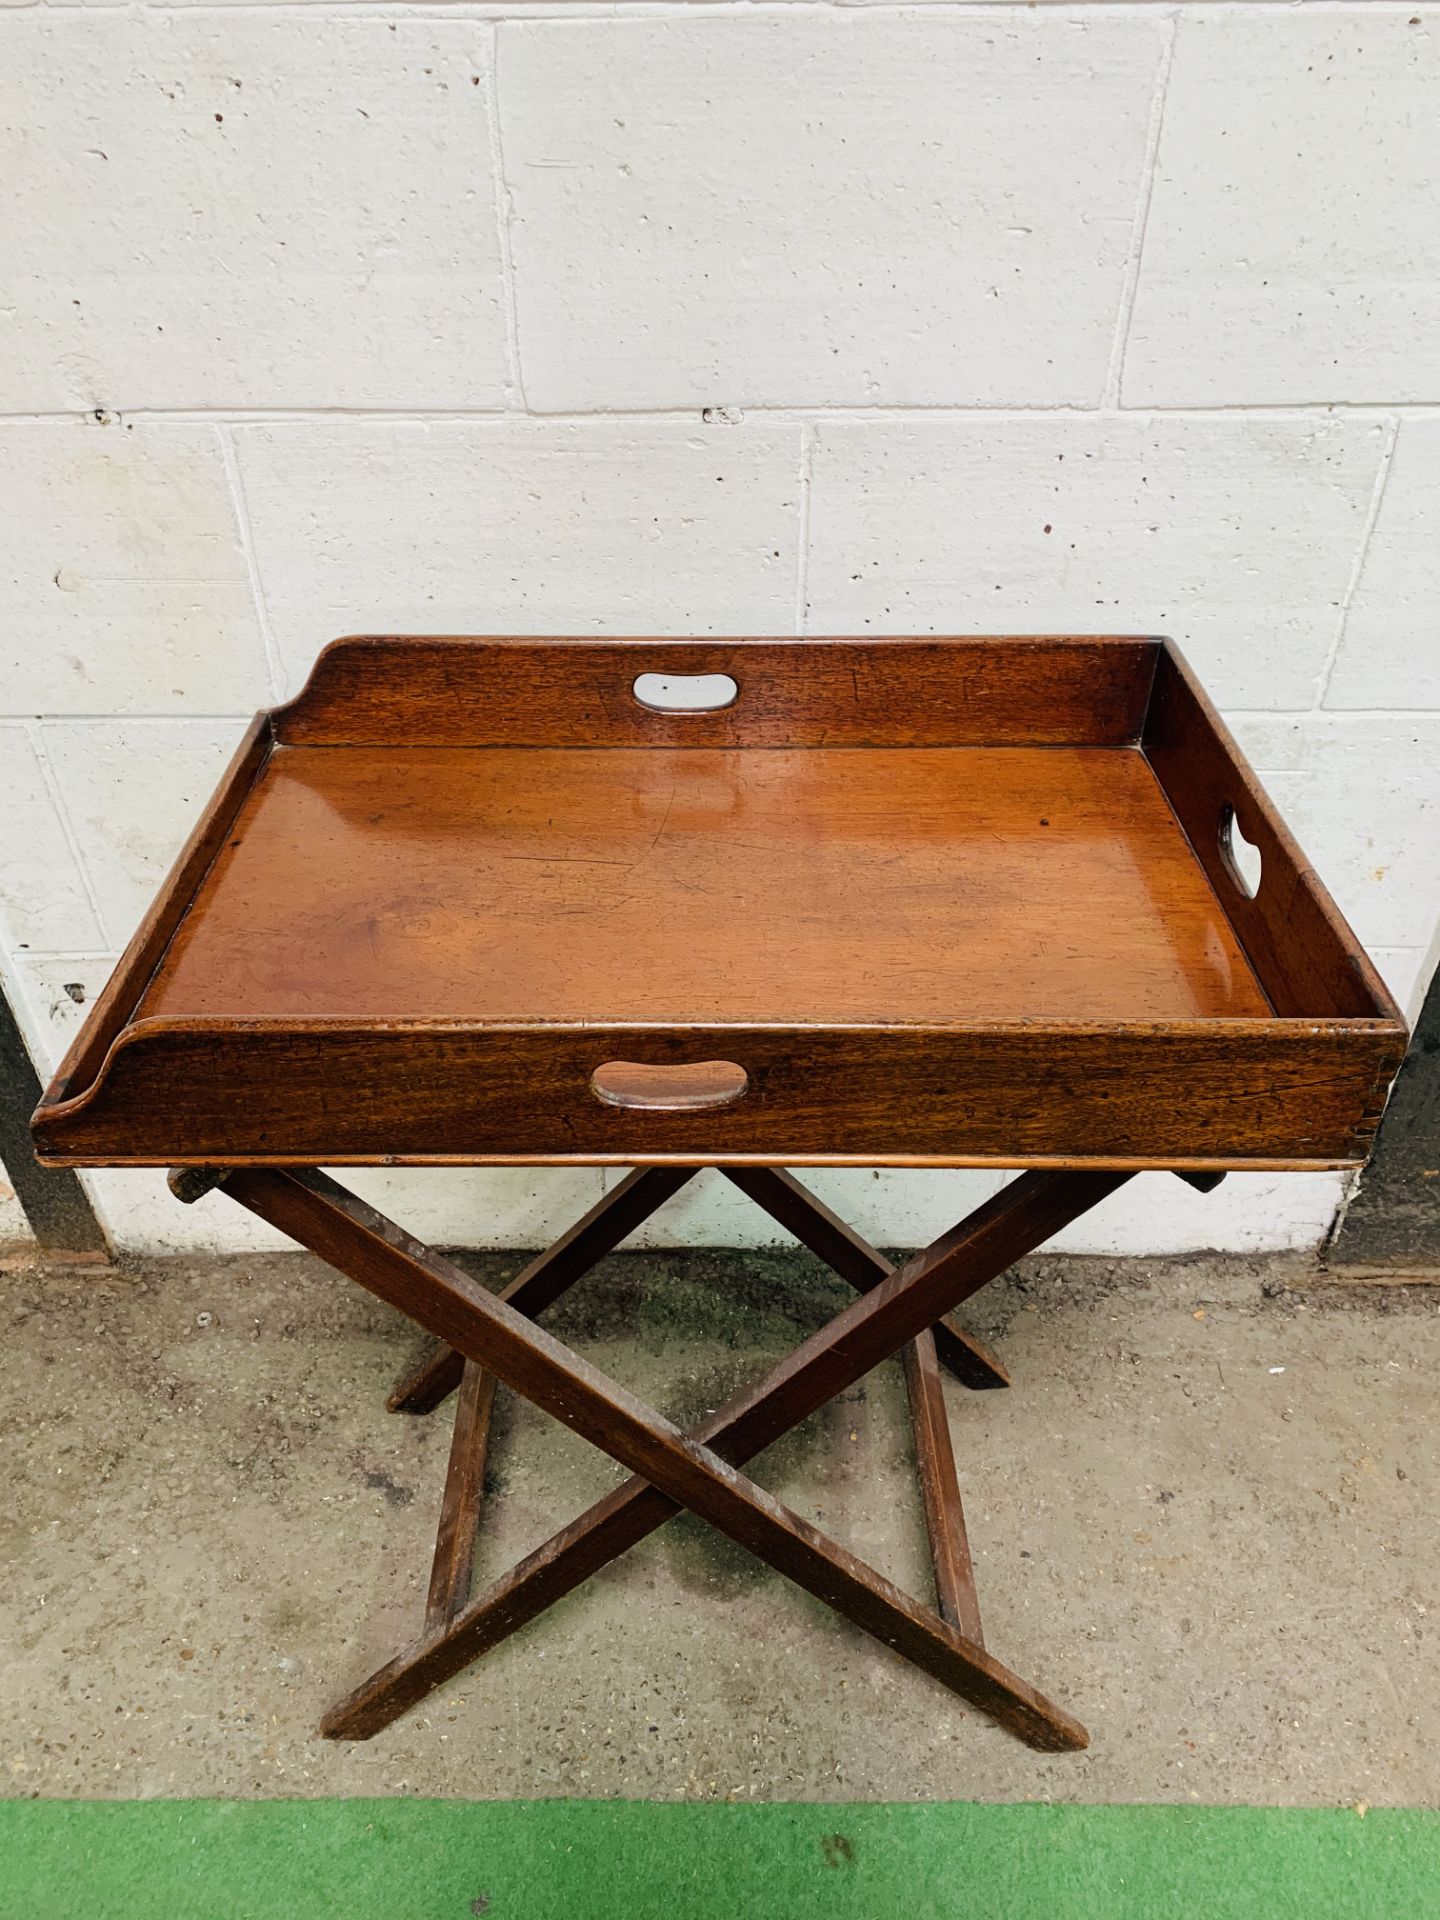 Mahogany Butler's tray 76 x 51cms, complete with mahognay folding stand.